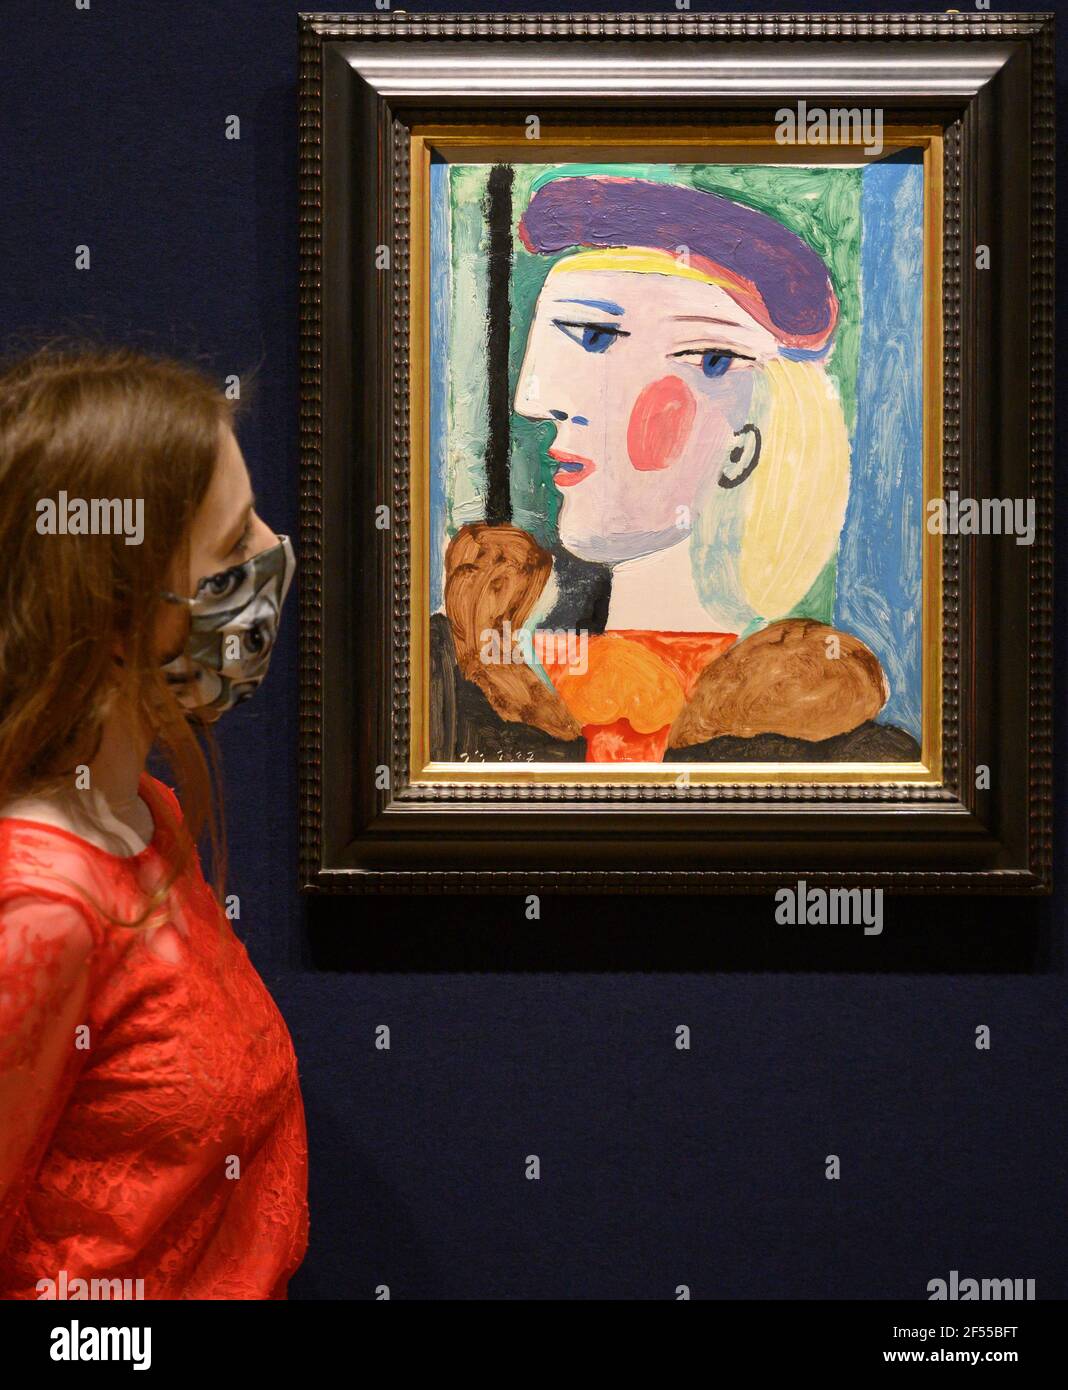 Bonhams, London, UK. 24 March 2021. A major Picasso portrait not seen for nearly 40 years, Femme au Béret Mauve, estimate $10,000,000-15,000,000, will be offered for sale at Bonhams Impressionist and Modern Art sale in New York on Thursday 13 May. Femme au Béret Mauve, painted in 1937, one of the artist’s most fruitful years during which he also produced Guernica. It is one of several depictions of Marie-Thérèse Walter painted at Le Tremblay-sur-Mauldre. Credit: Malcolm Park/Alamy Stock Photo